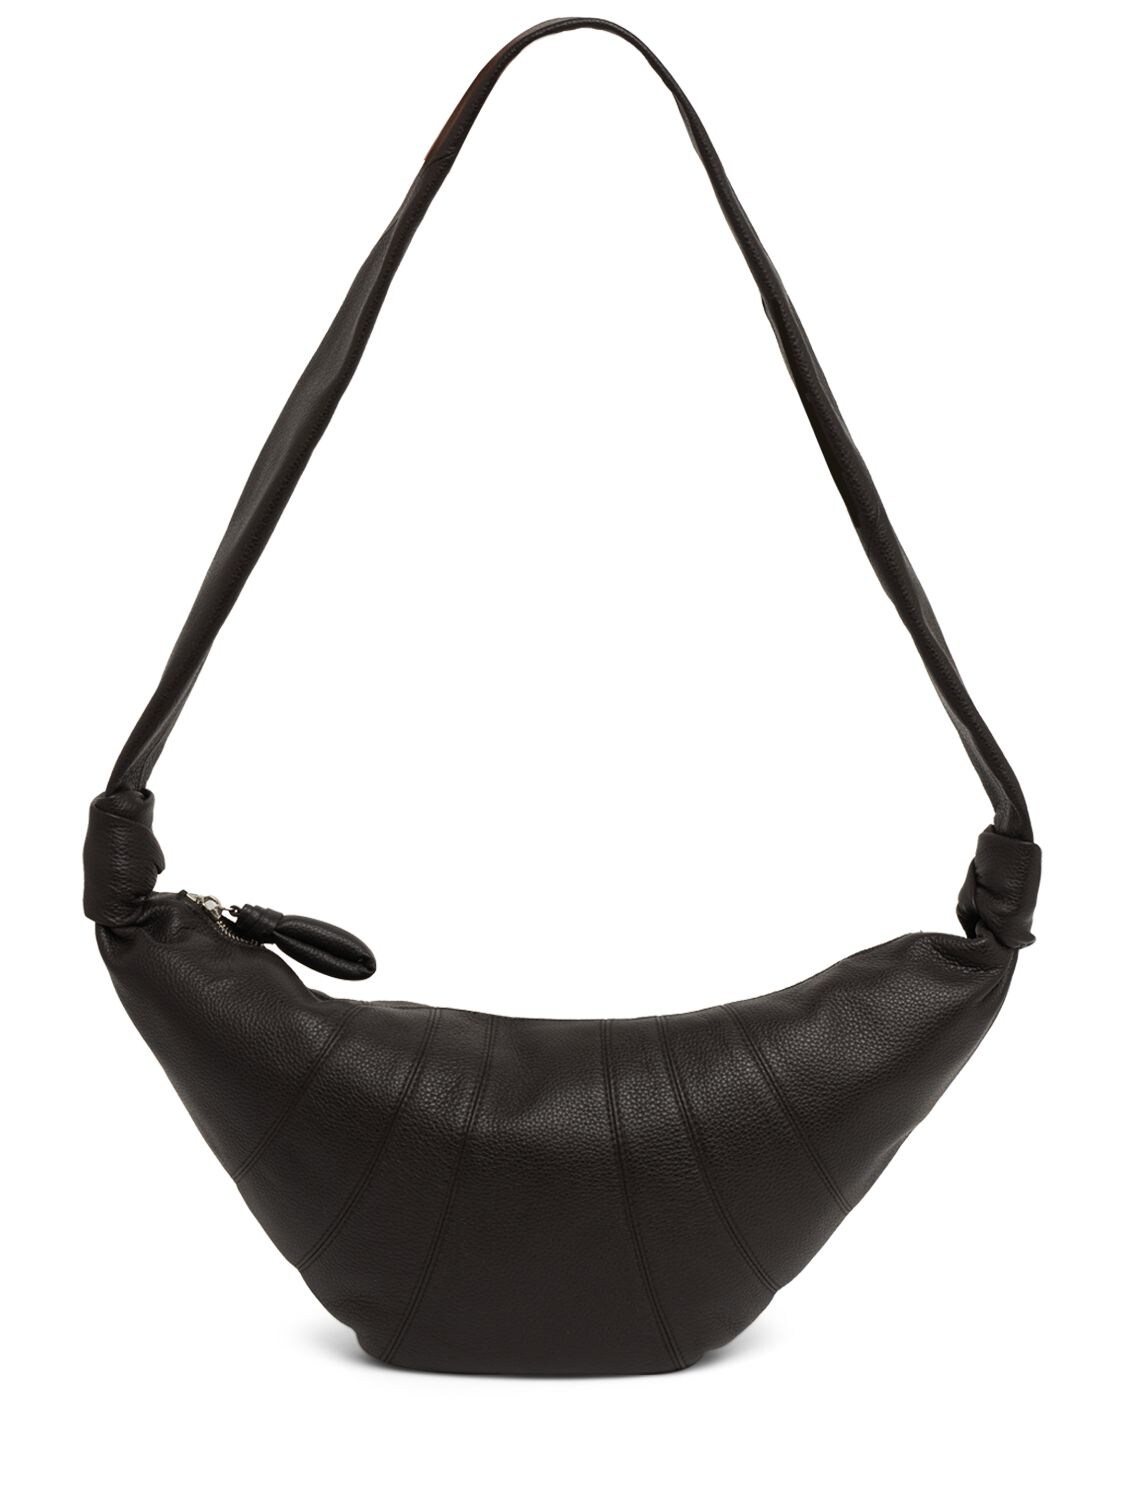 Lemaire Small Croissant Grain Leather Bag In Black